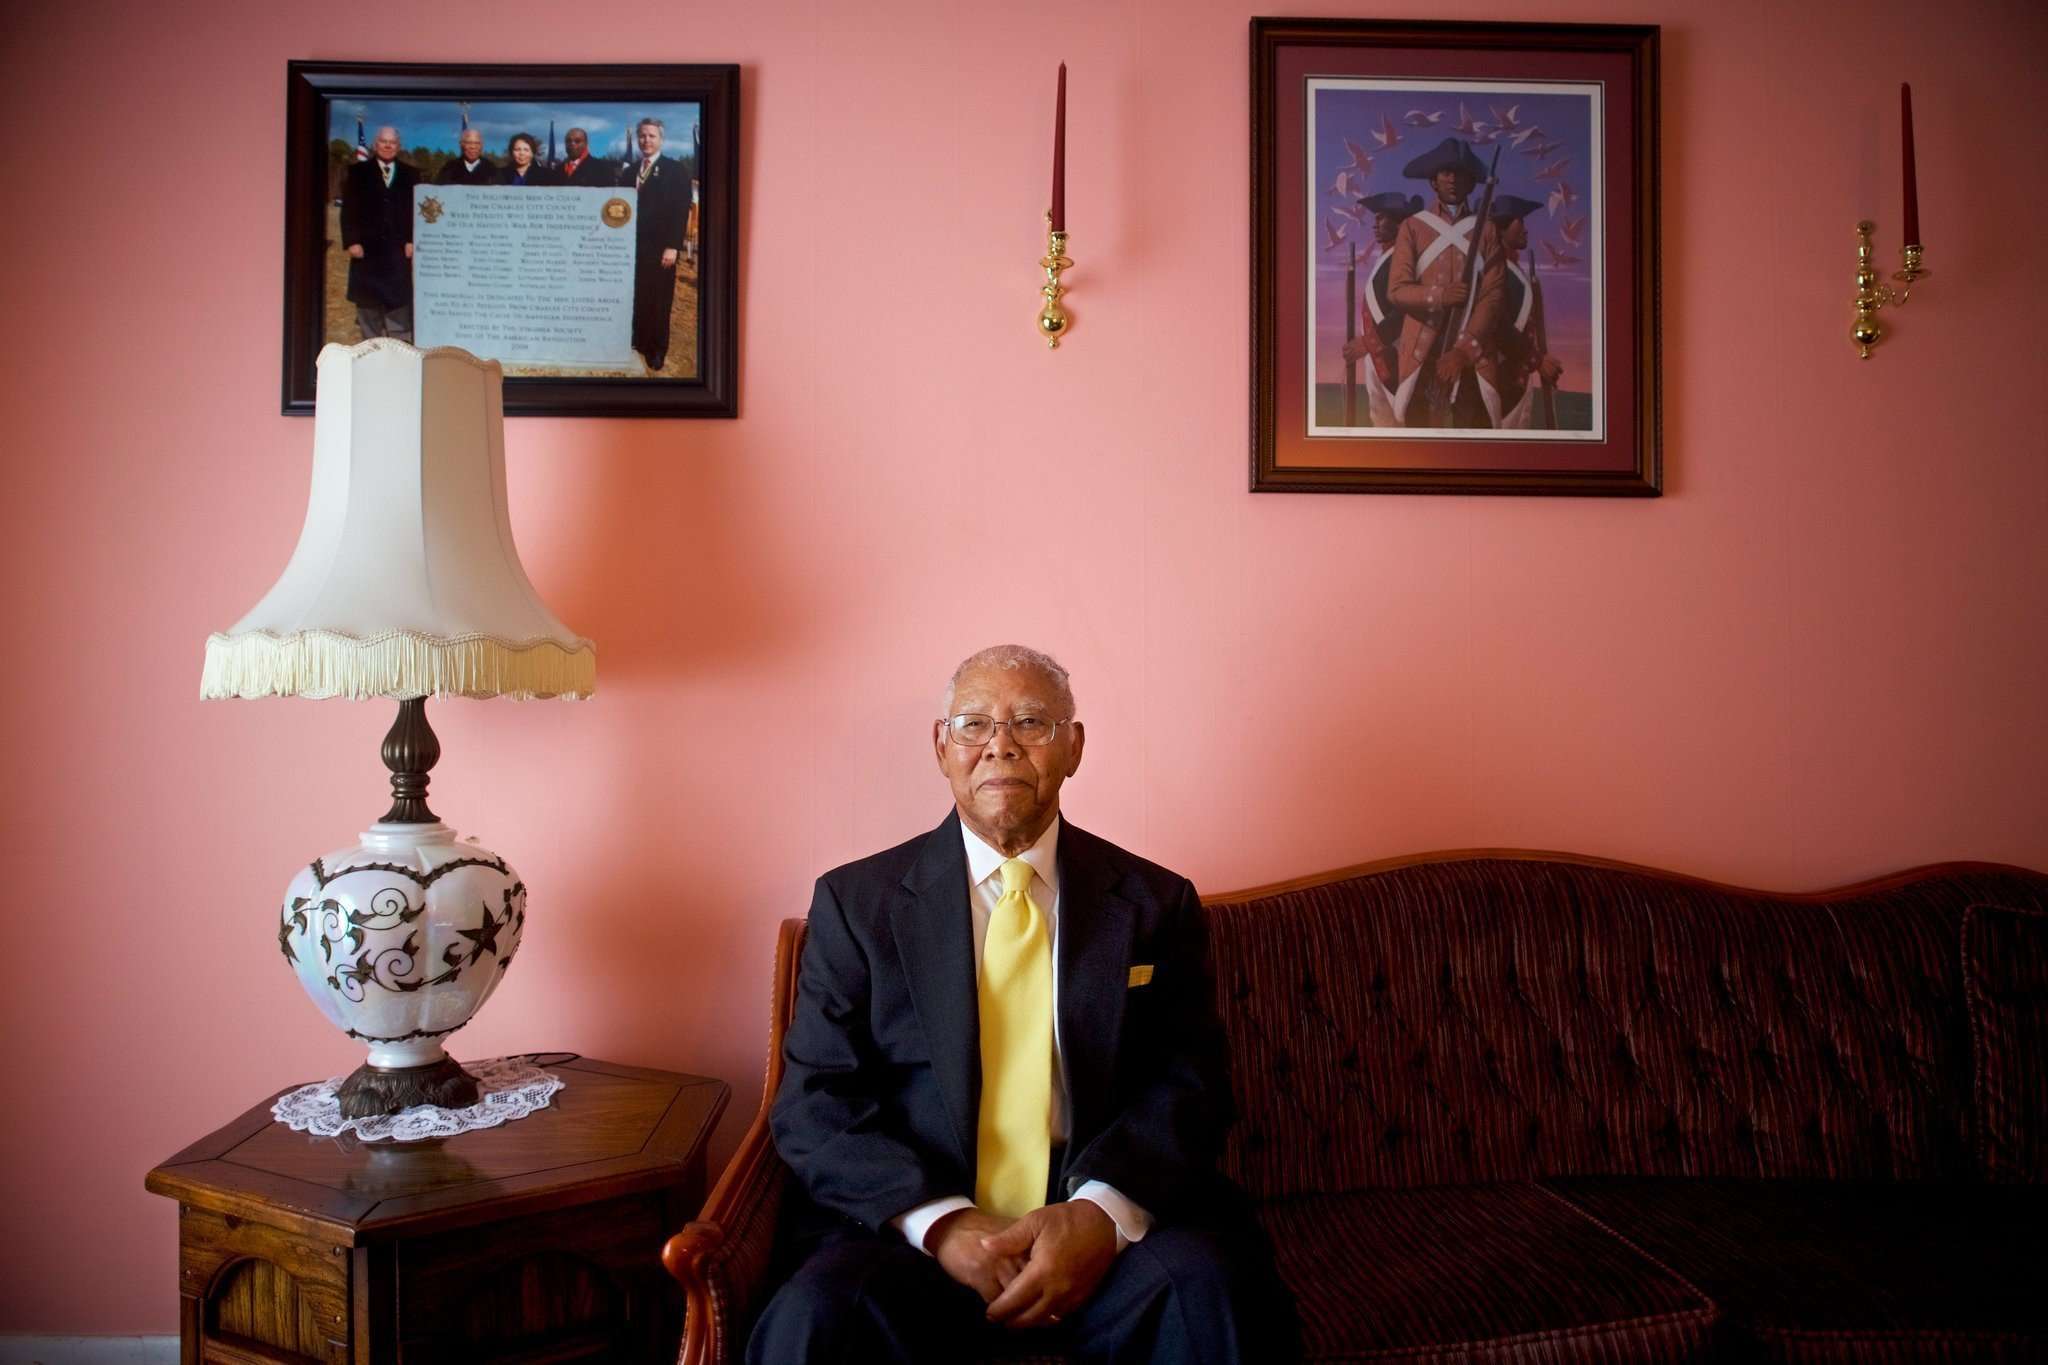 black WWII vet John E. James Jr. sitting at his house in a suit